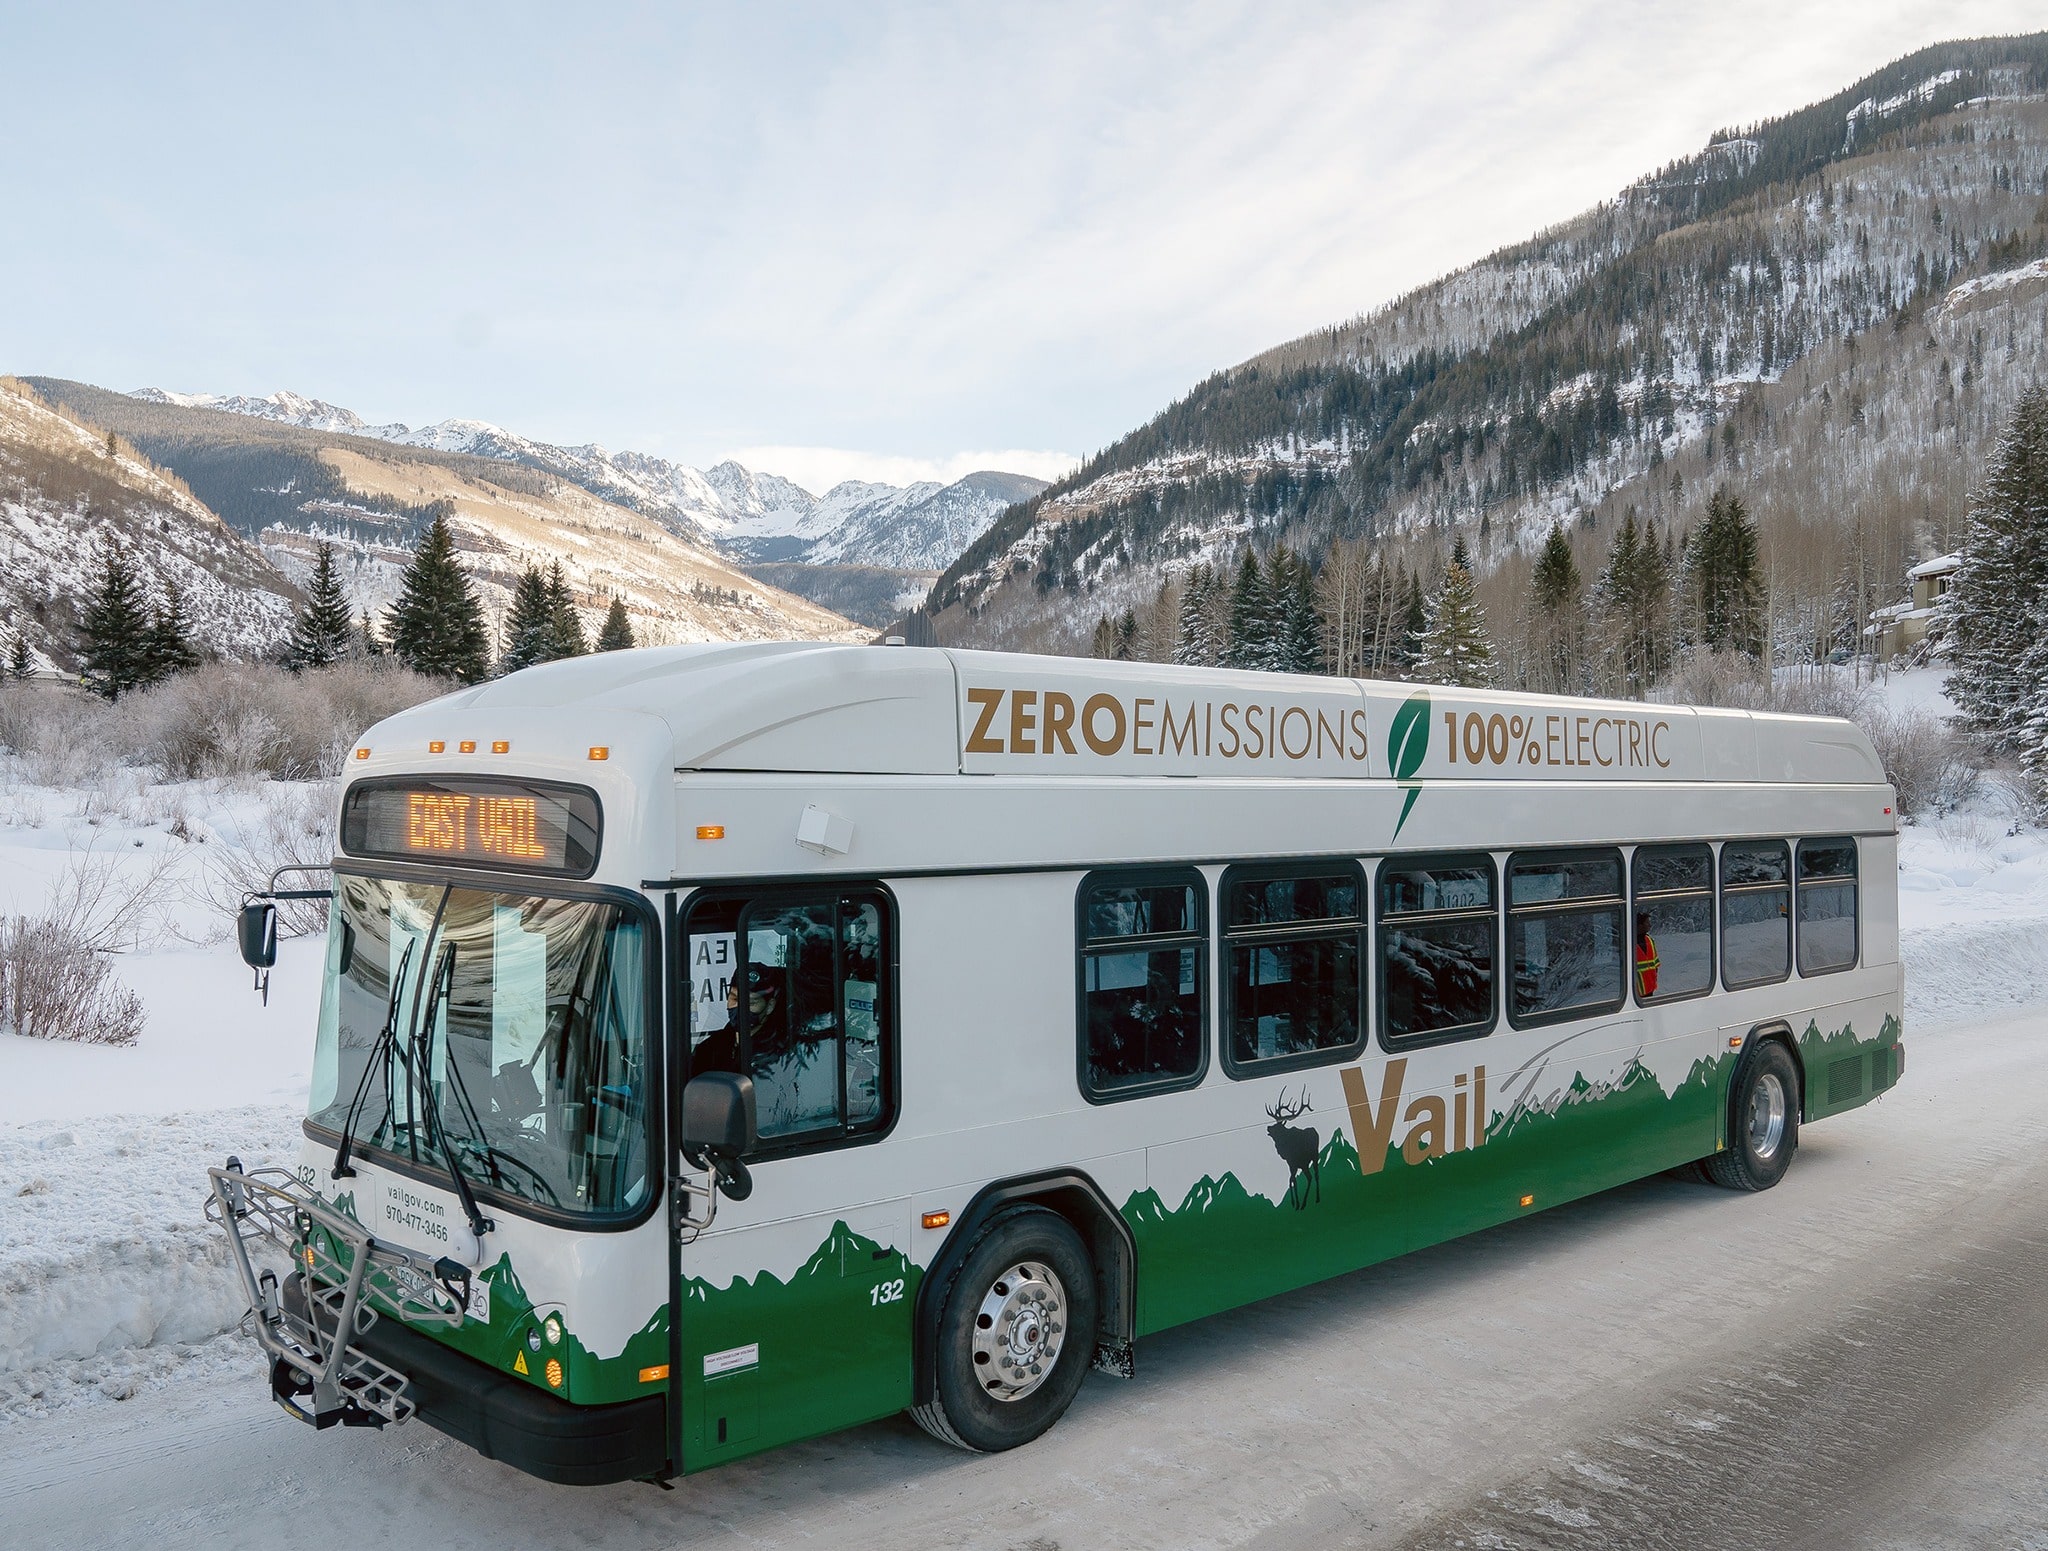 Town of Vail, CO, to Receive $1.8 Million Grant for Clean Transit